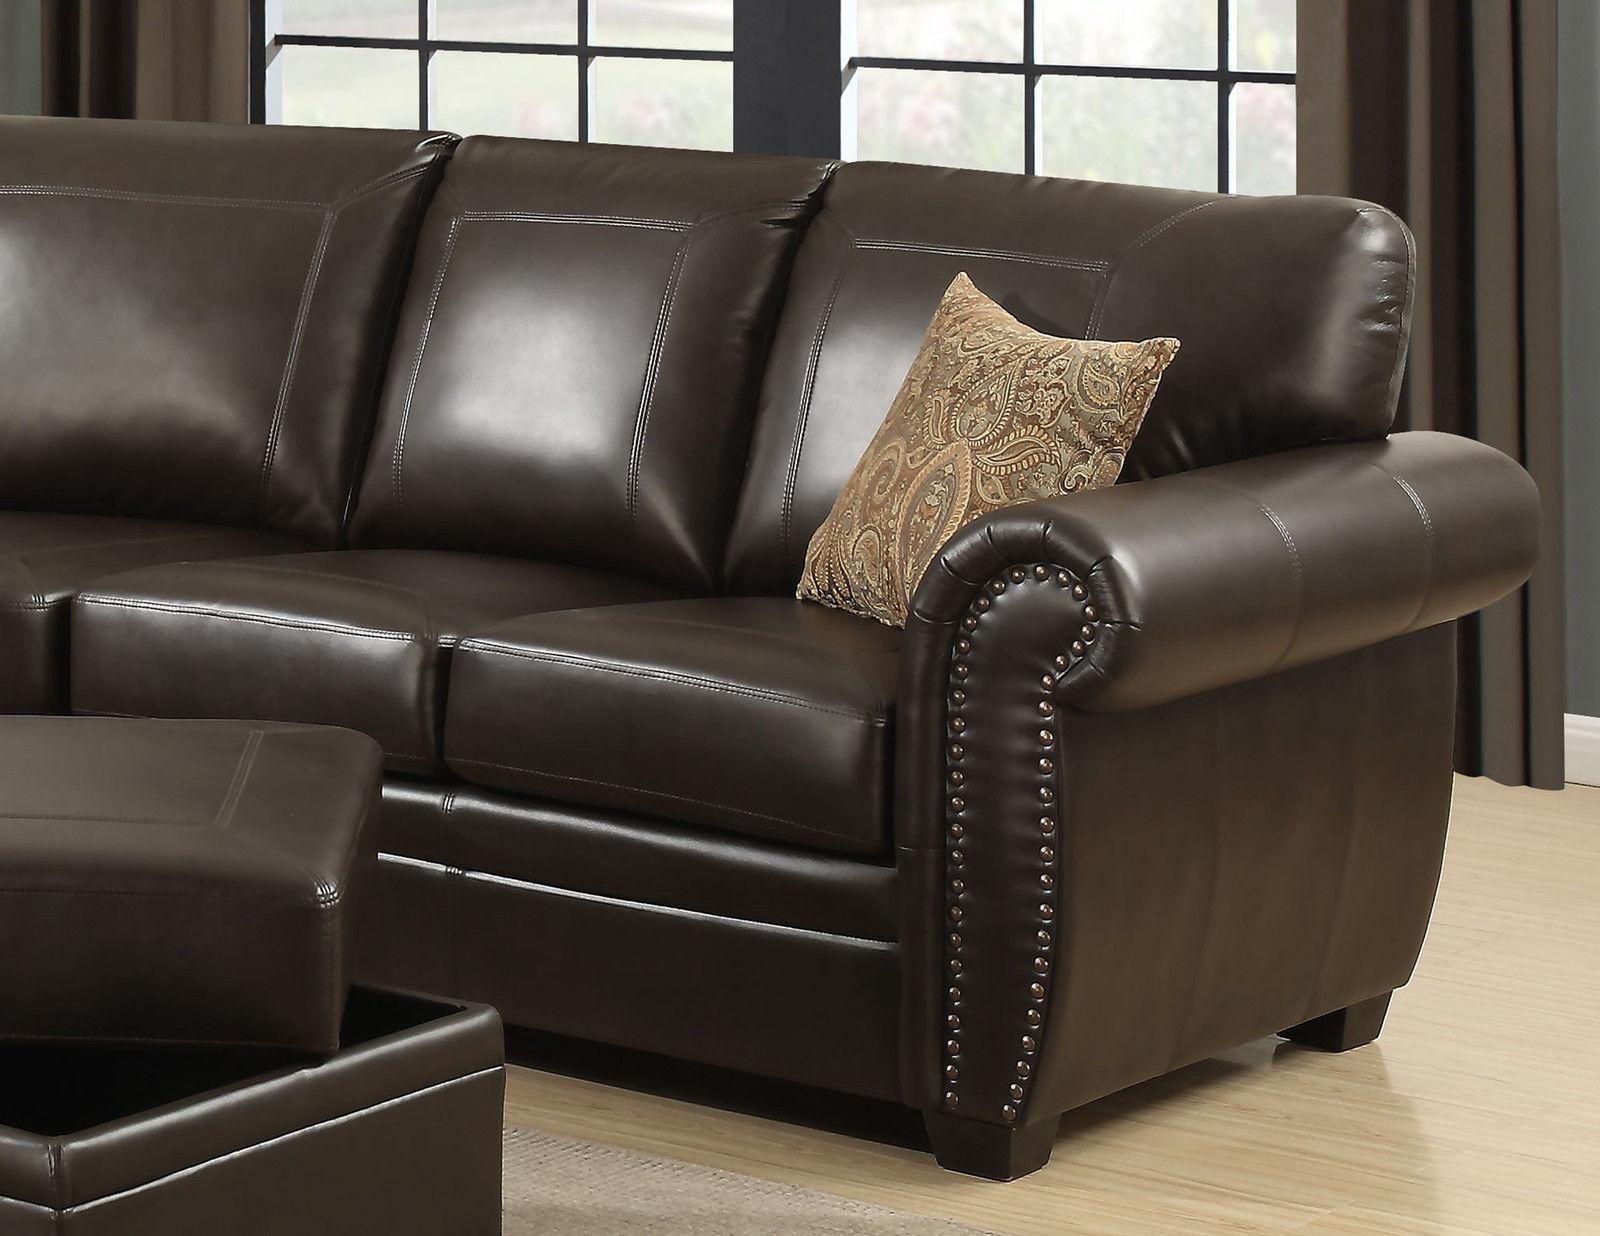 

    
LOUIS-BRN-4PC-SECTIONAL AC Pacific Sectional Sofa and Ottoman
